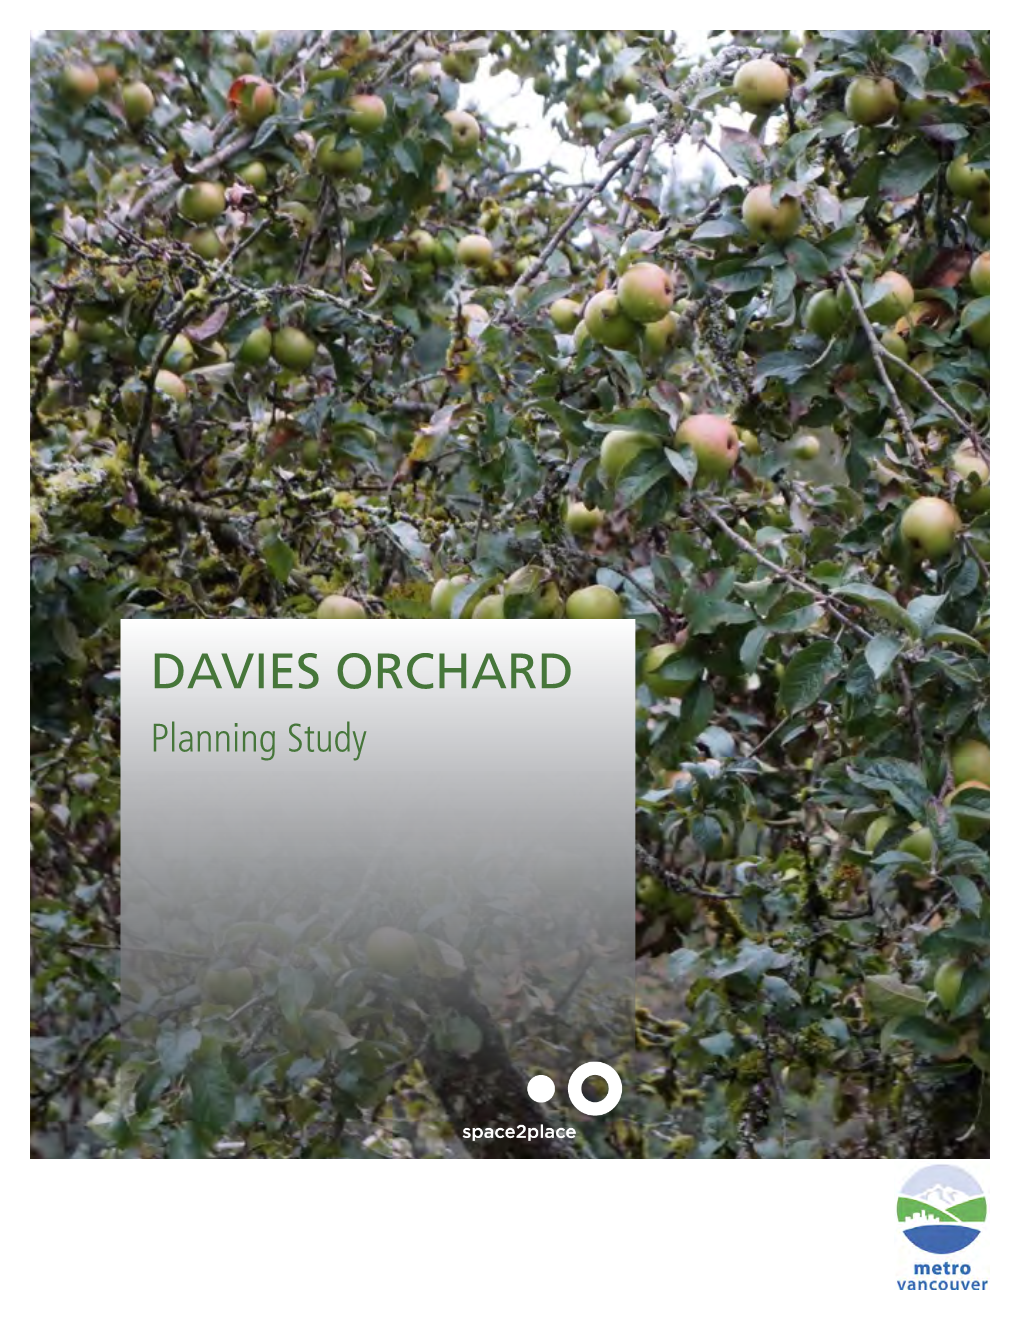 DAVIES ORCHARD Planning Study Prepared for Metro Vancouver Regional Parks Spring 2017 by Space2place Design Inc